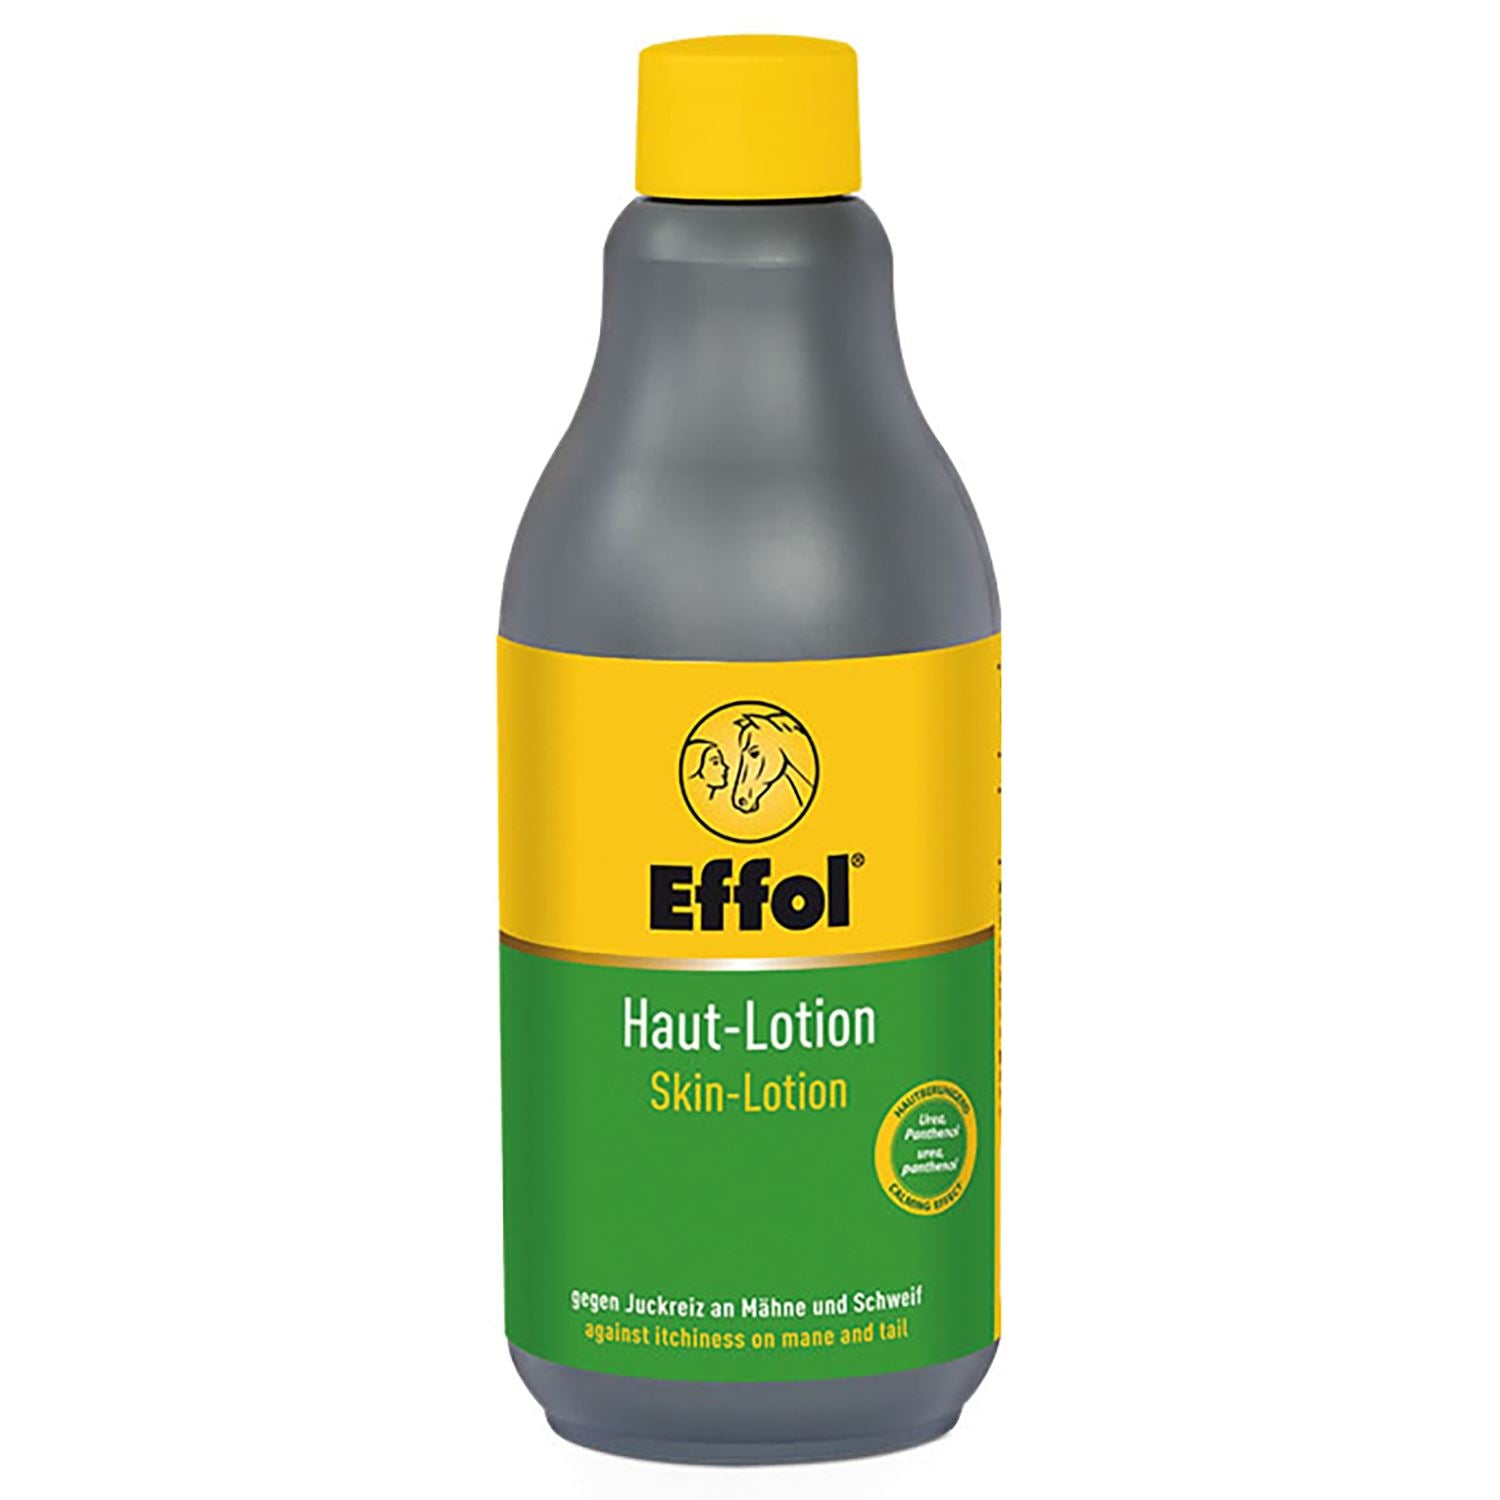 Effol Skin Lotion - Just Horse Riders